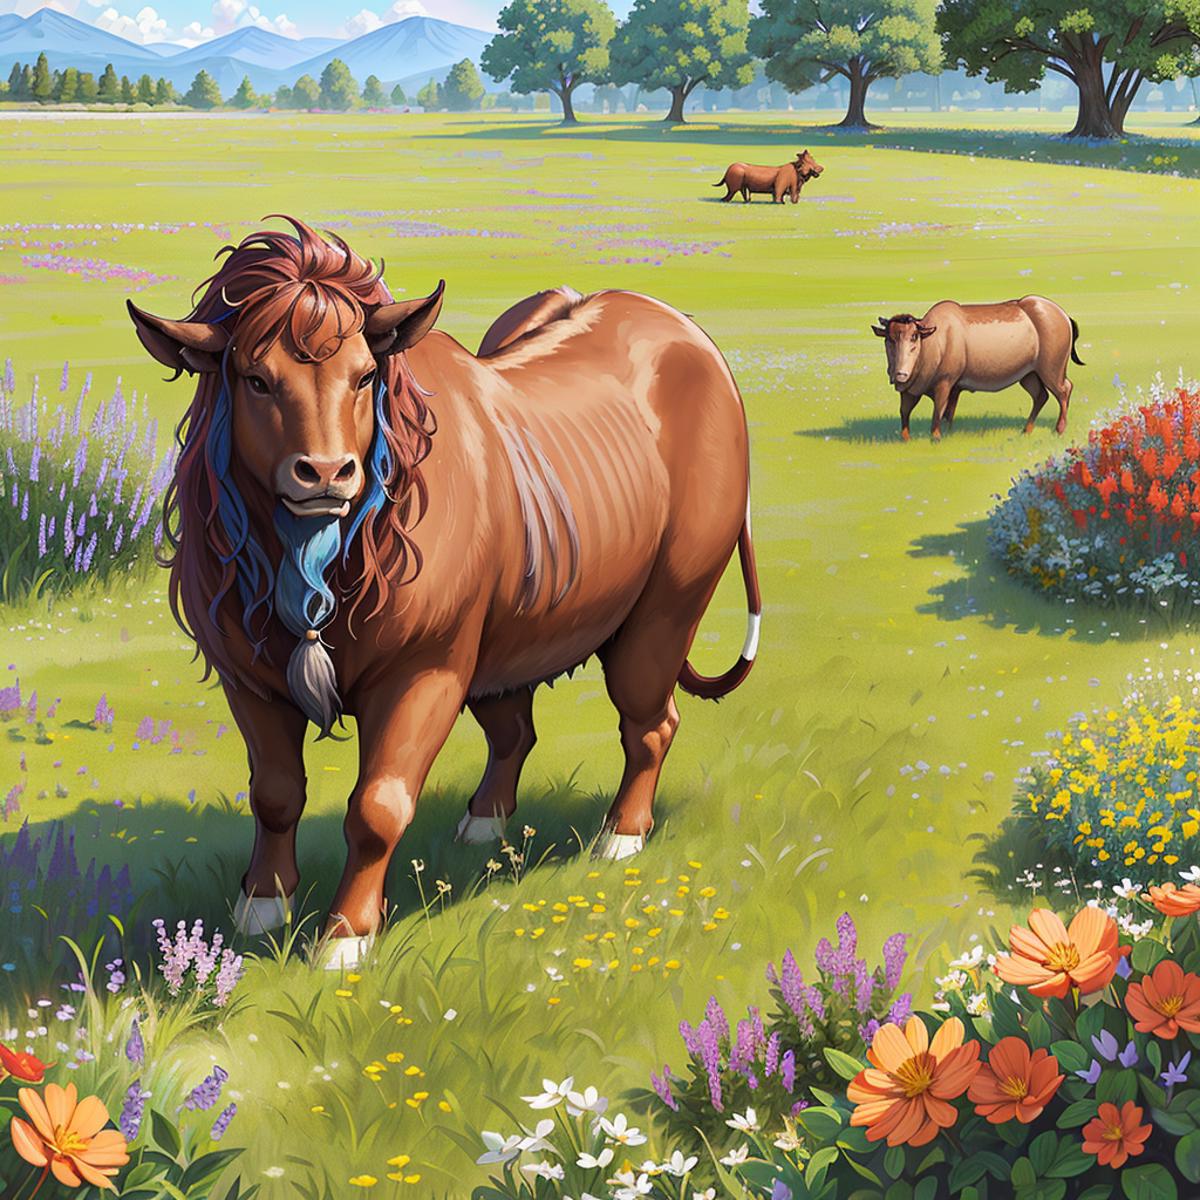 (Full shot:1.2), A snarl of minotaurs, meadow, colorful wildflowers, lush grass, serene